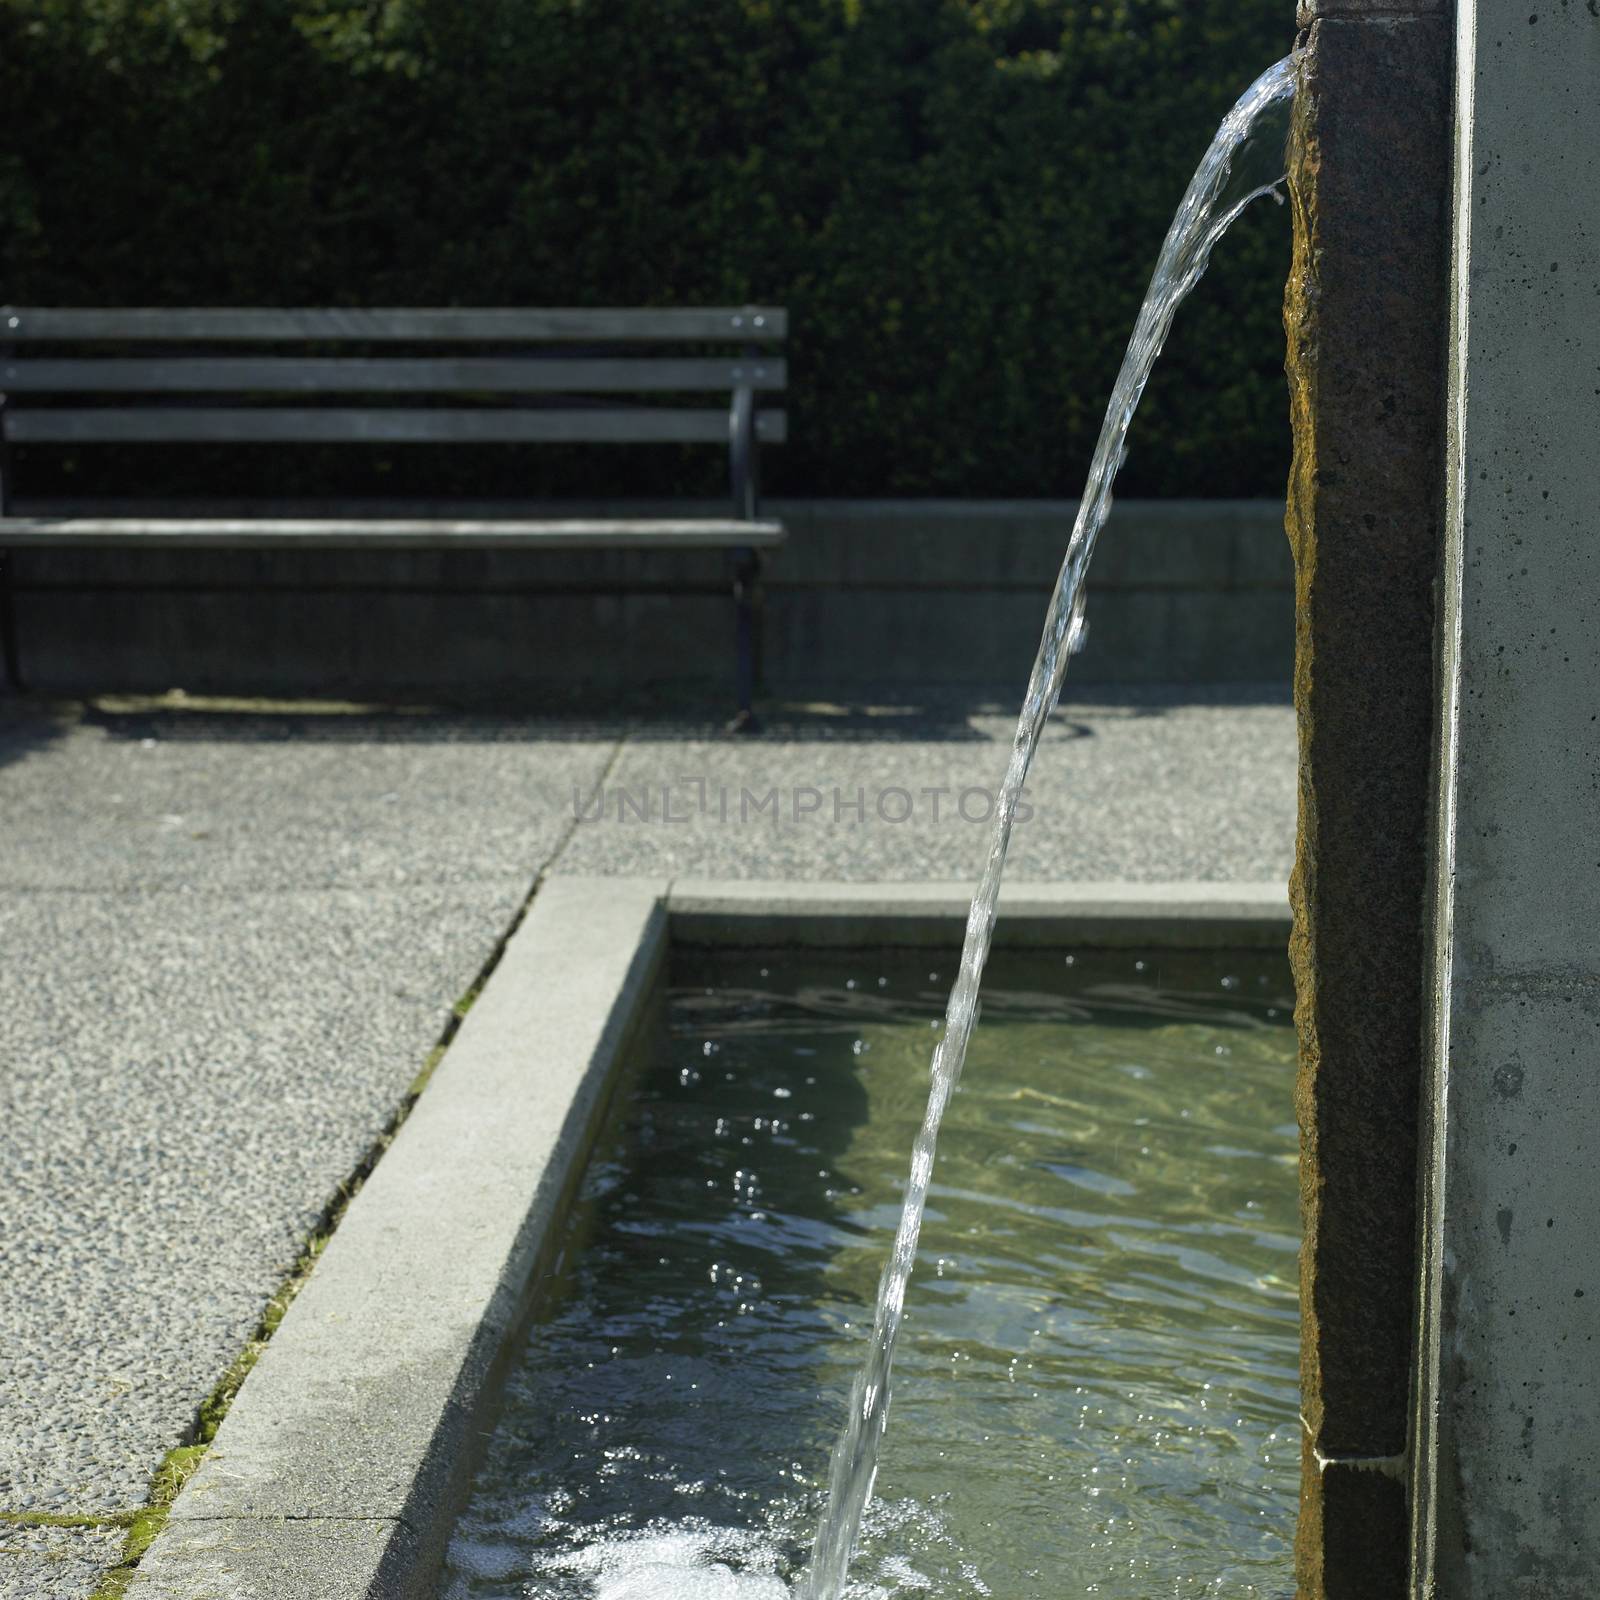 Urban water feature by mmm